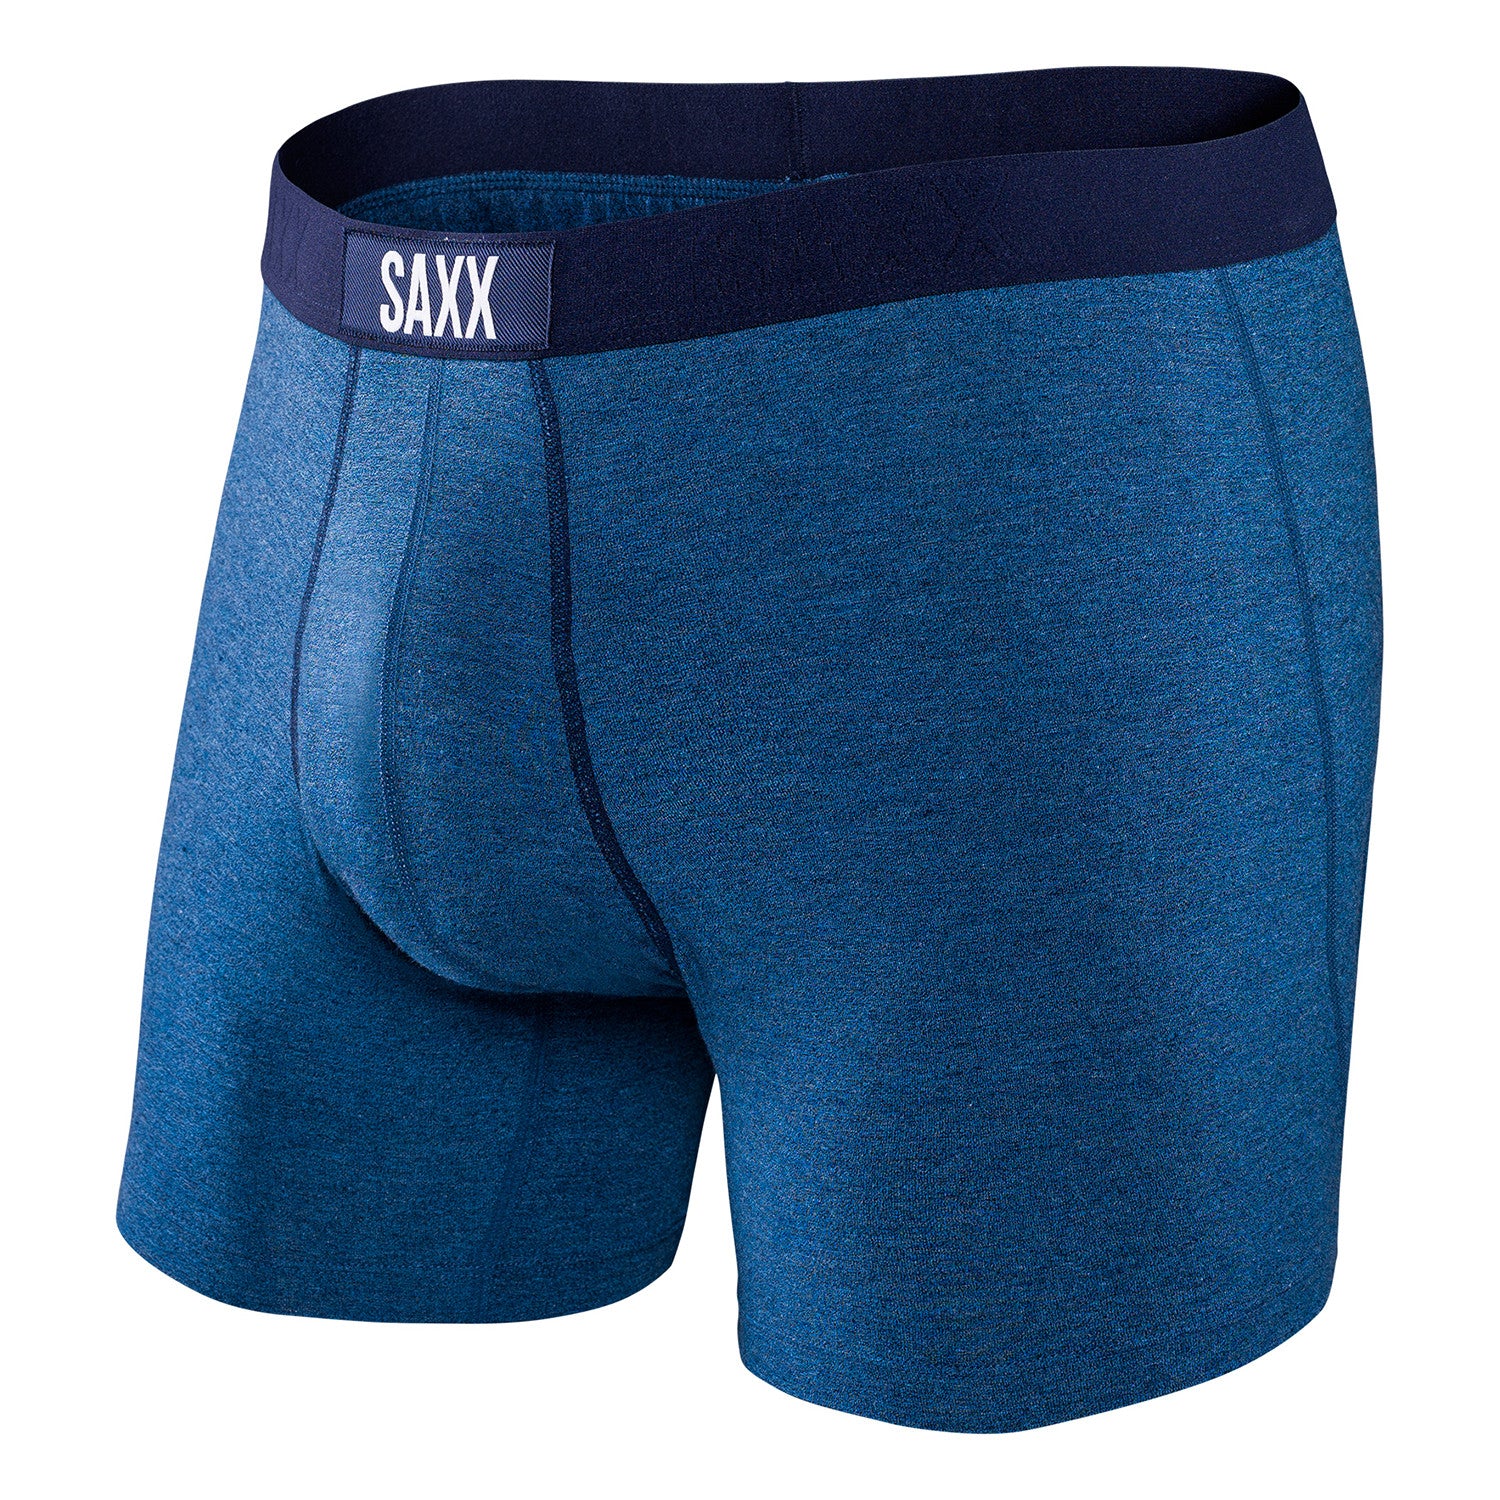 Saxx Underwear Co. Vibe Modern Fit Boxers USA / Bright Navy 